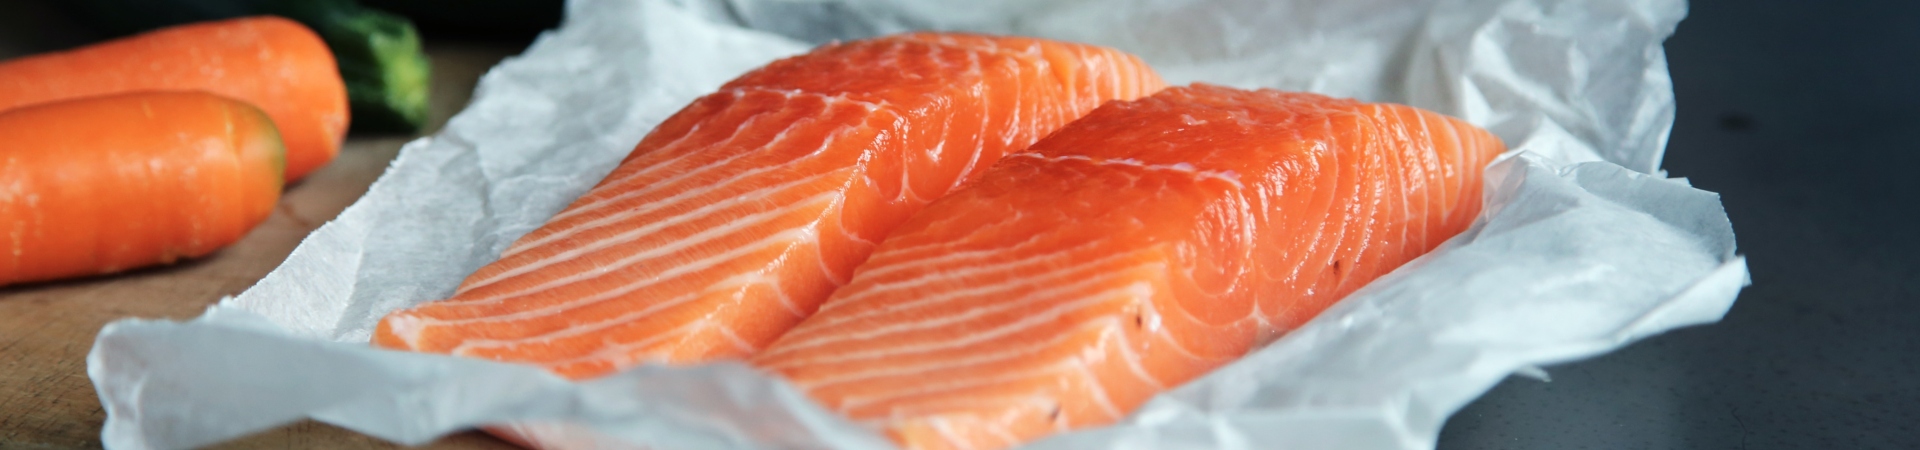 Omega-3: An essential fat you need to add to your diet